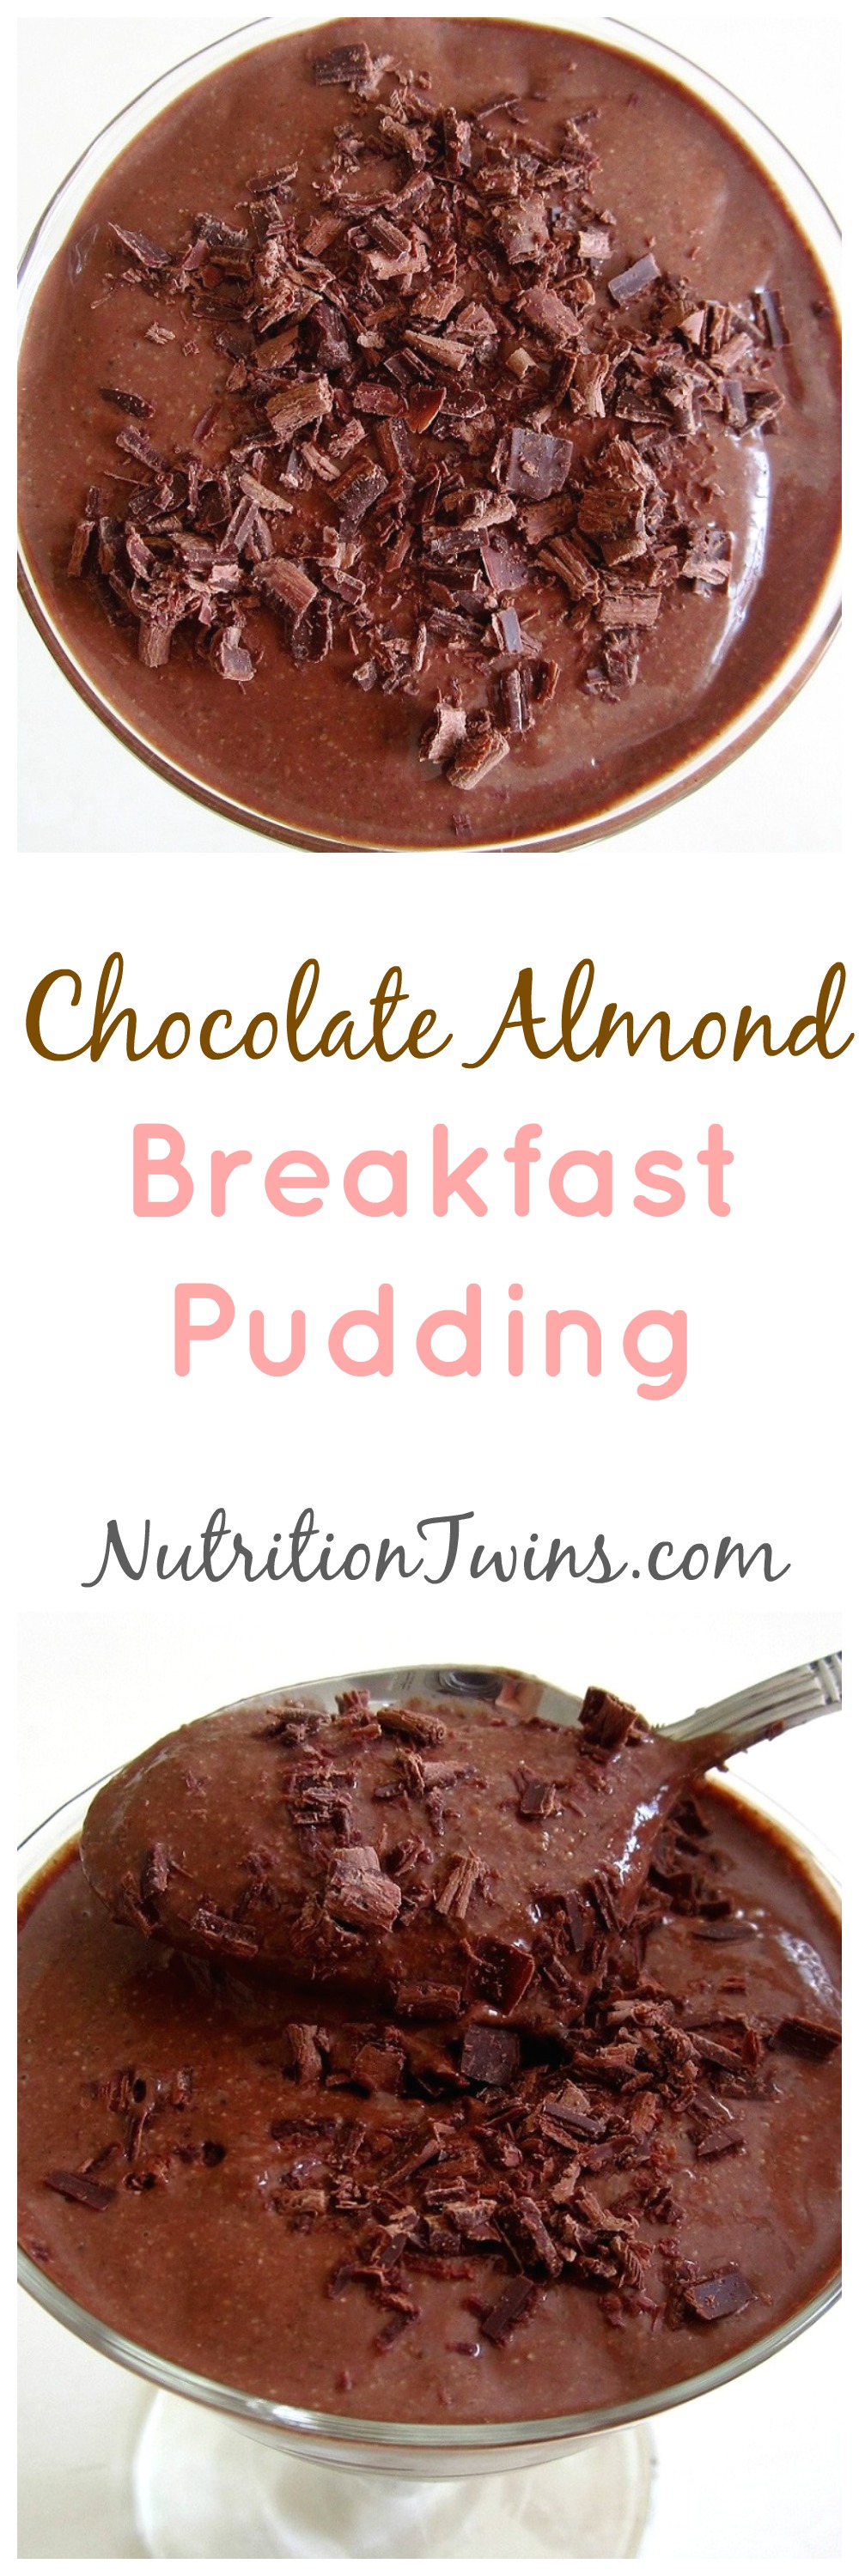 Chocolate_Almond_Breakfast_Pudding_collage